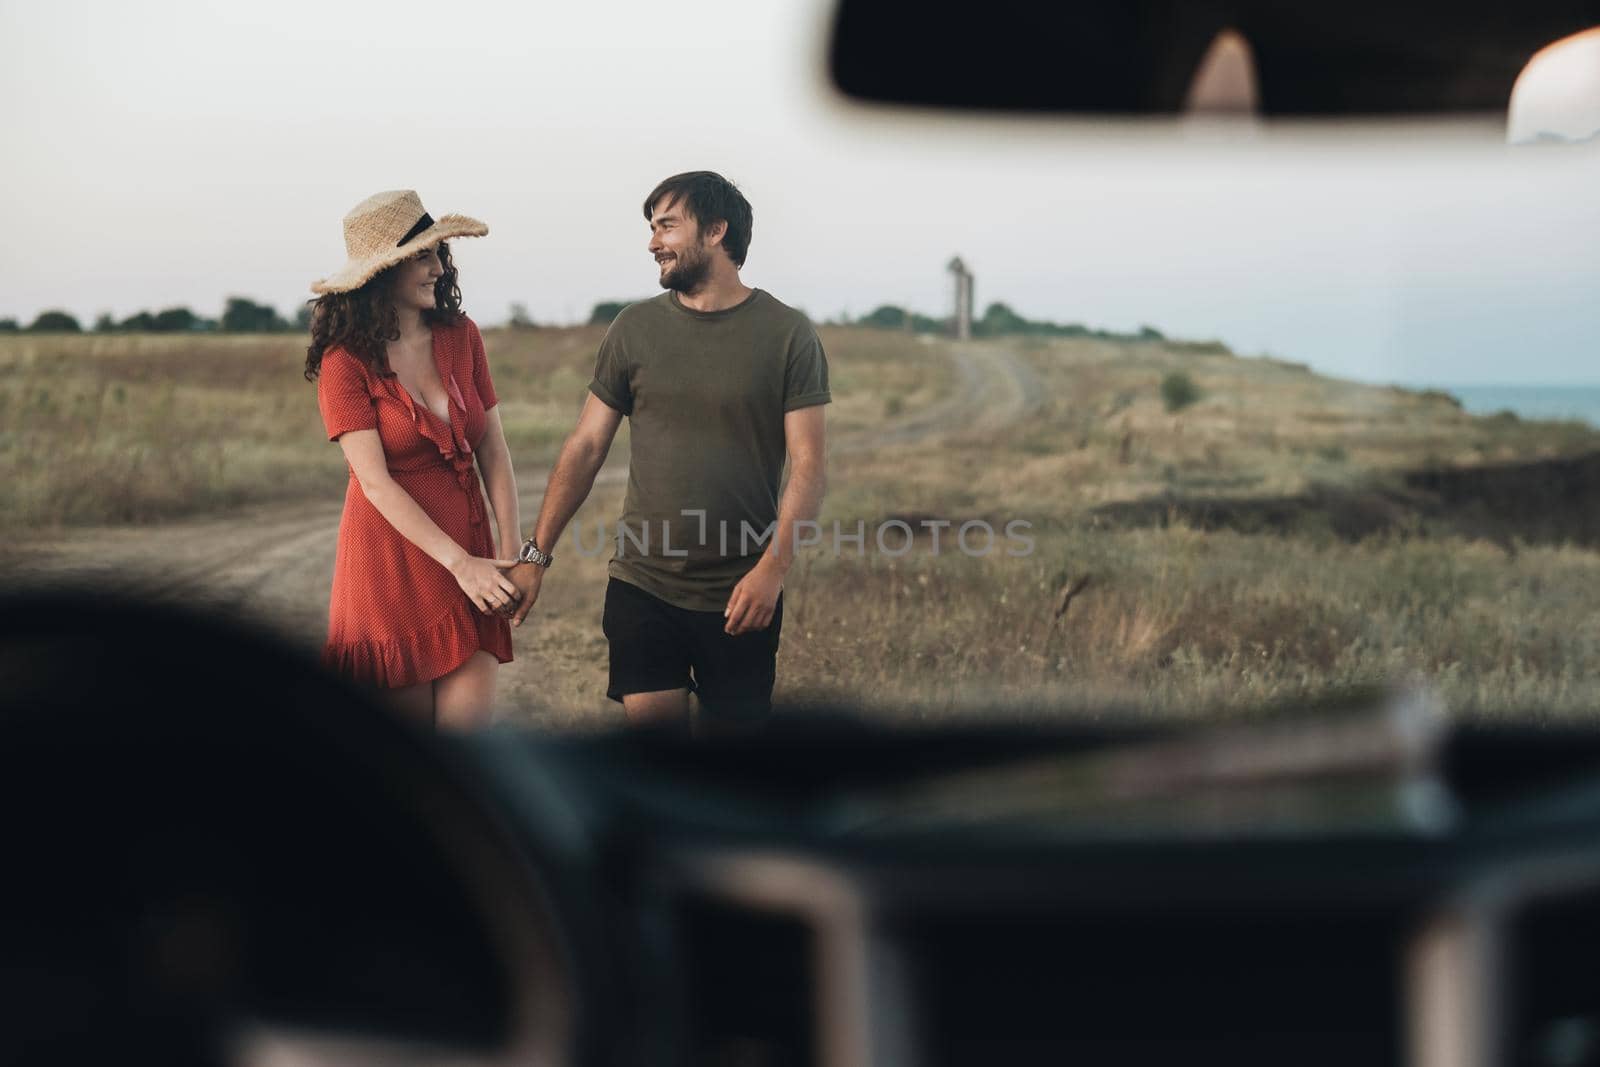 View Through Front Window of Car, Young Couple Man and Woman Having Fun Time Together Outdoors Near Sea